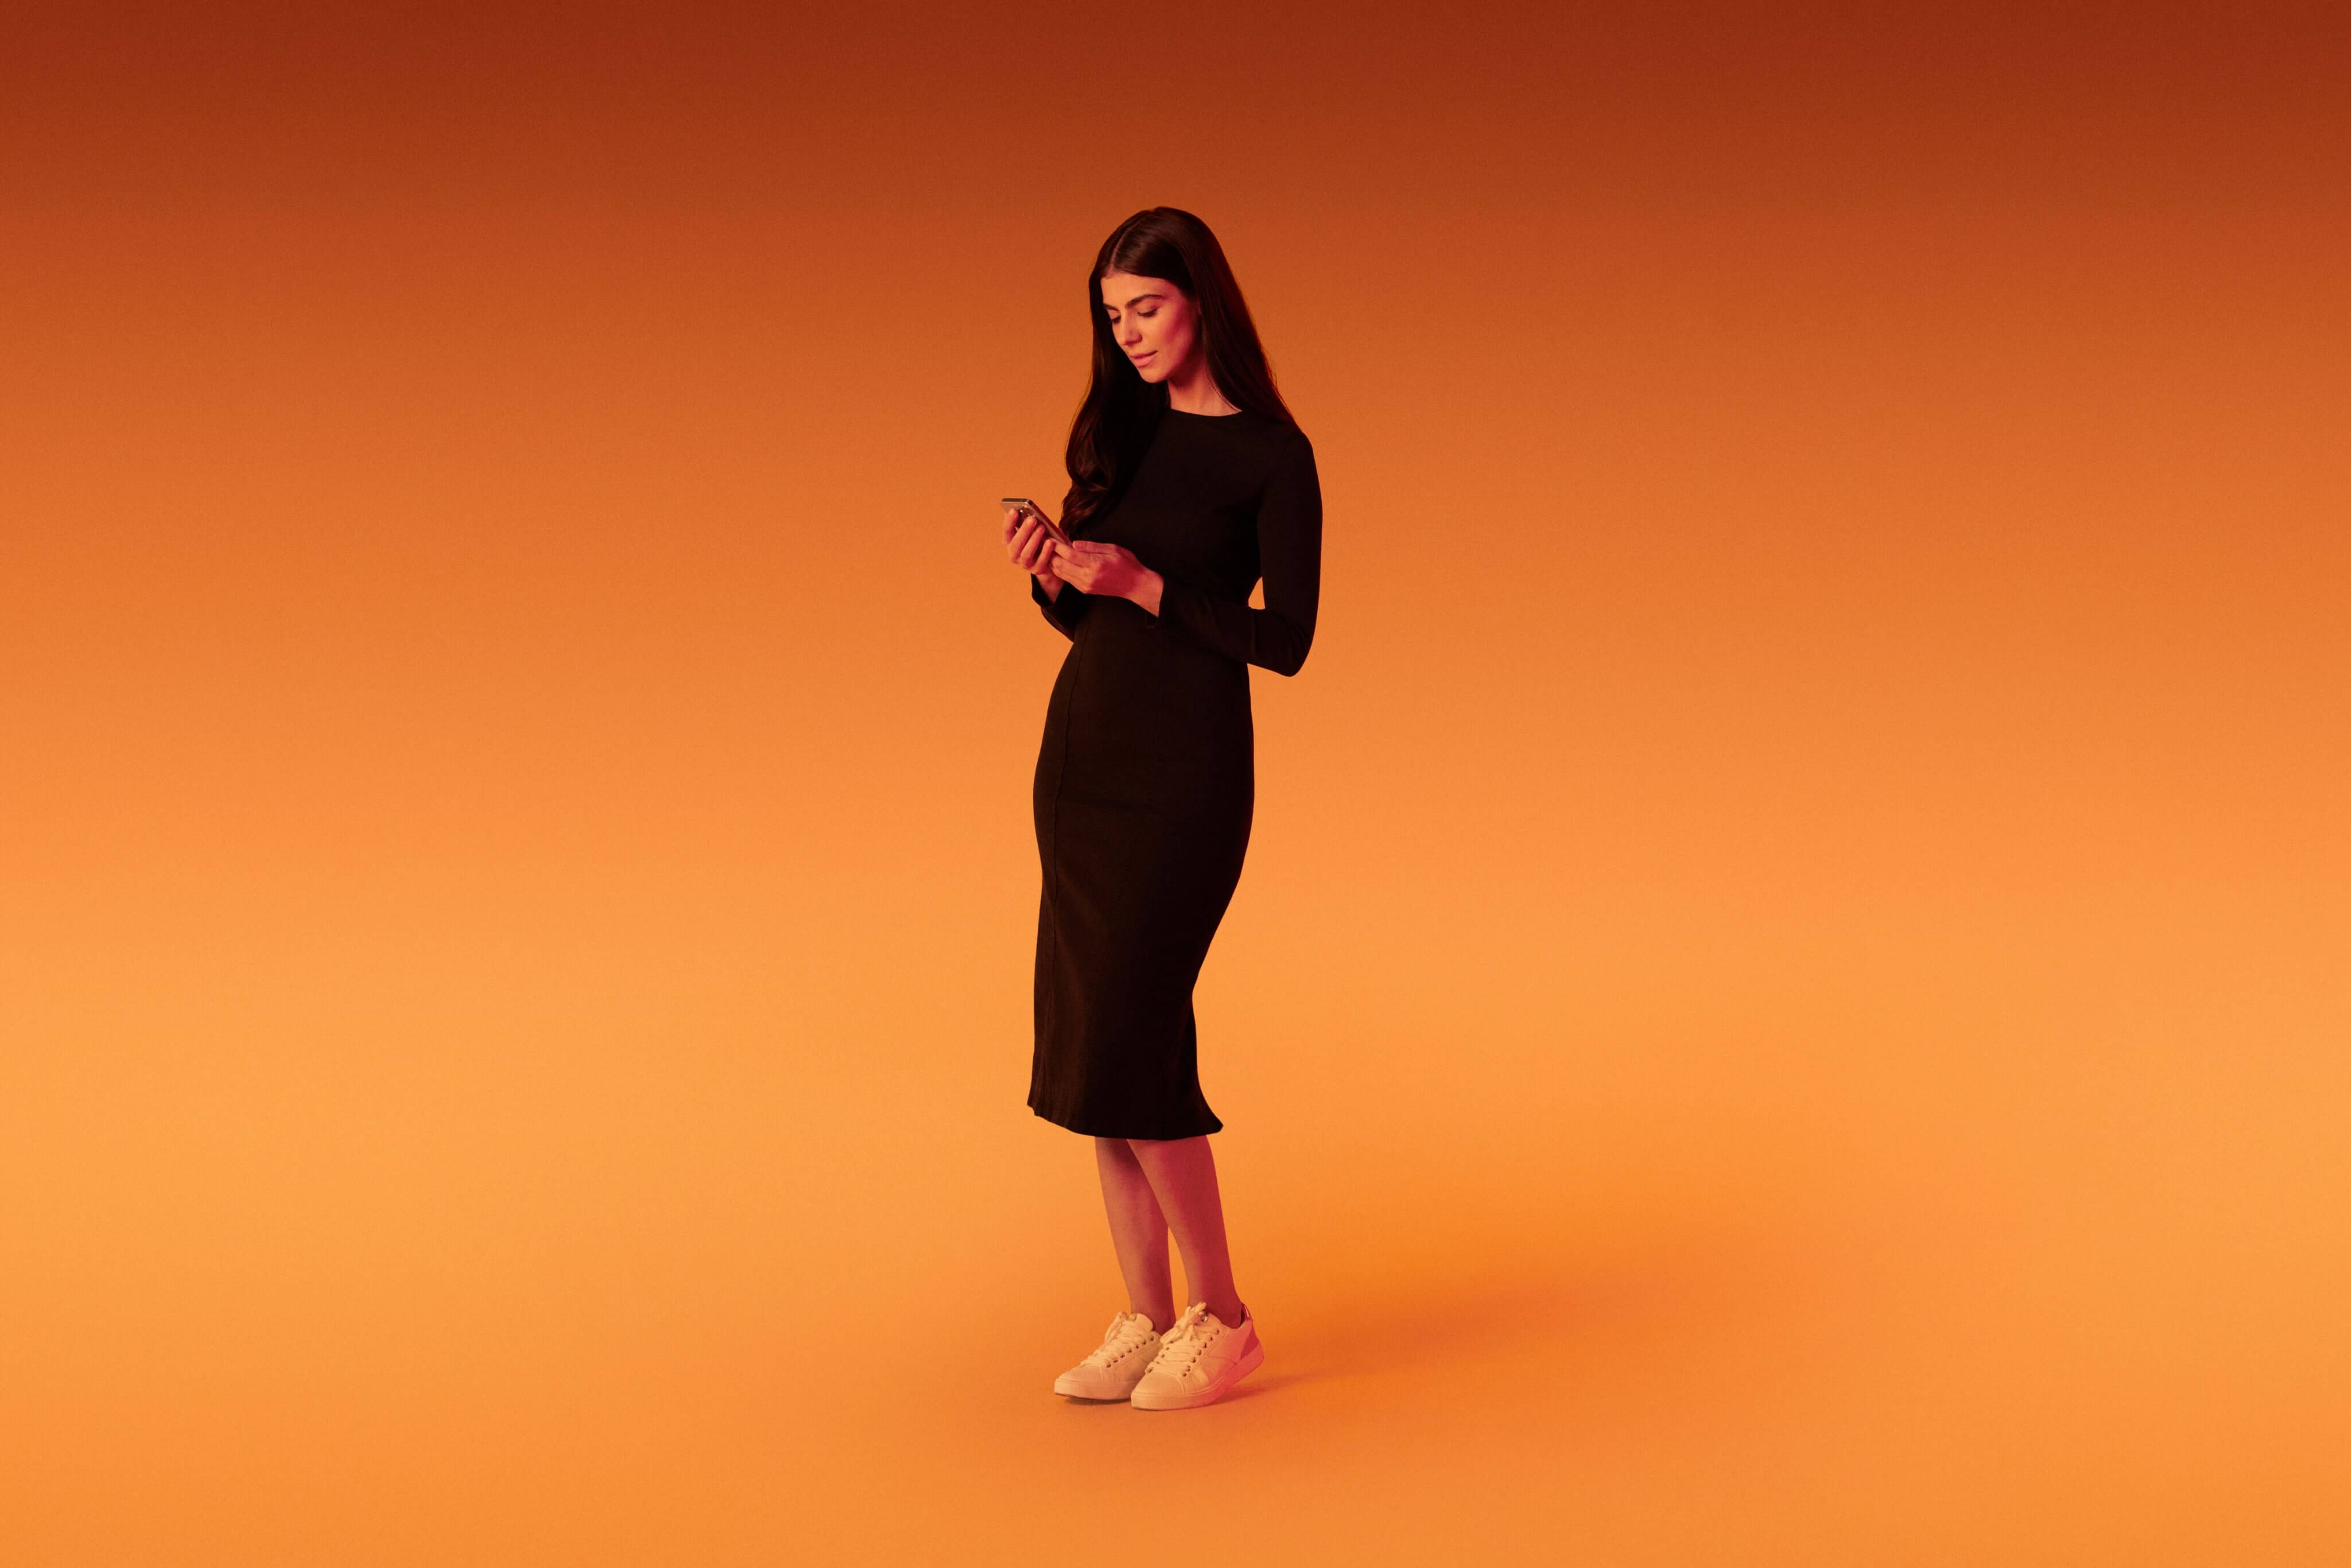 Standing woman engaging with the Xapo Bank app on her mobile phone, overlaid with an orange hue.